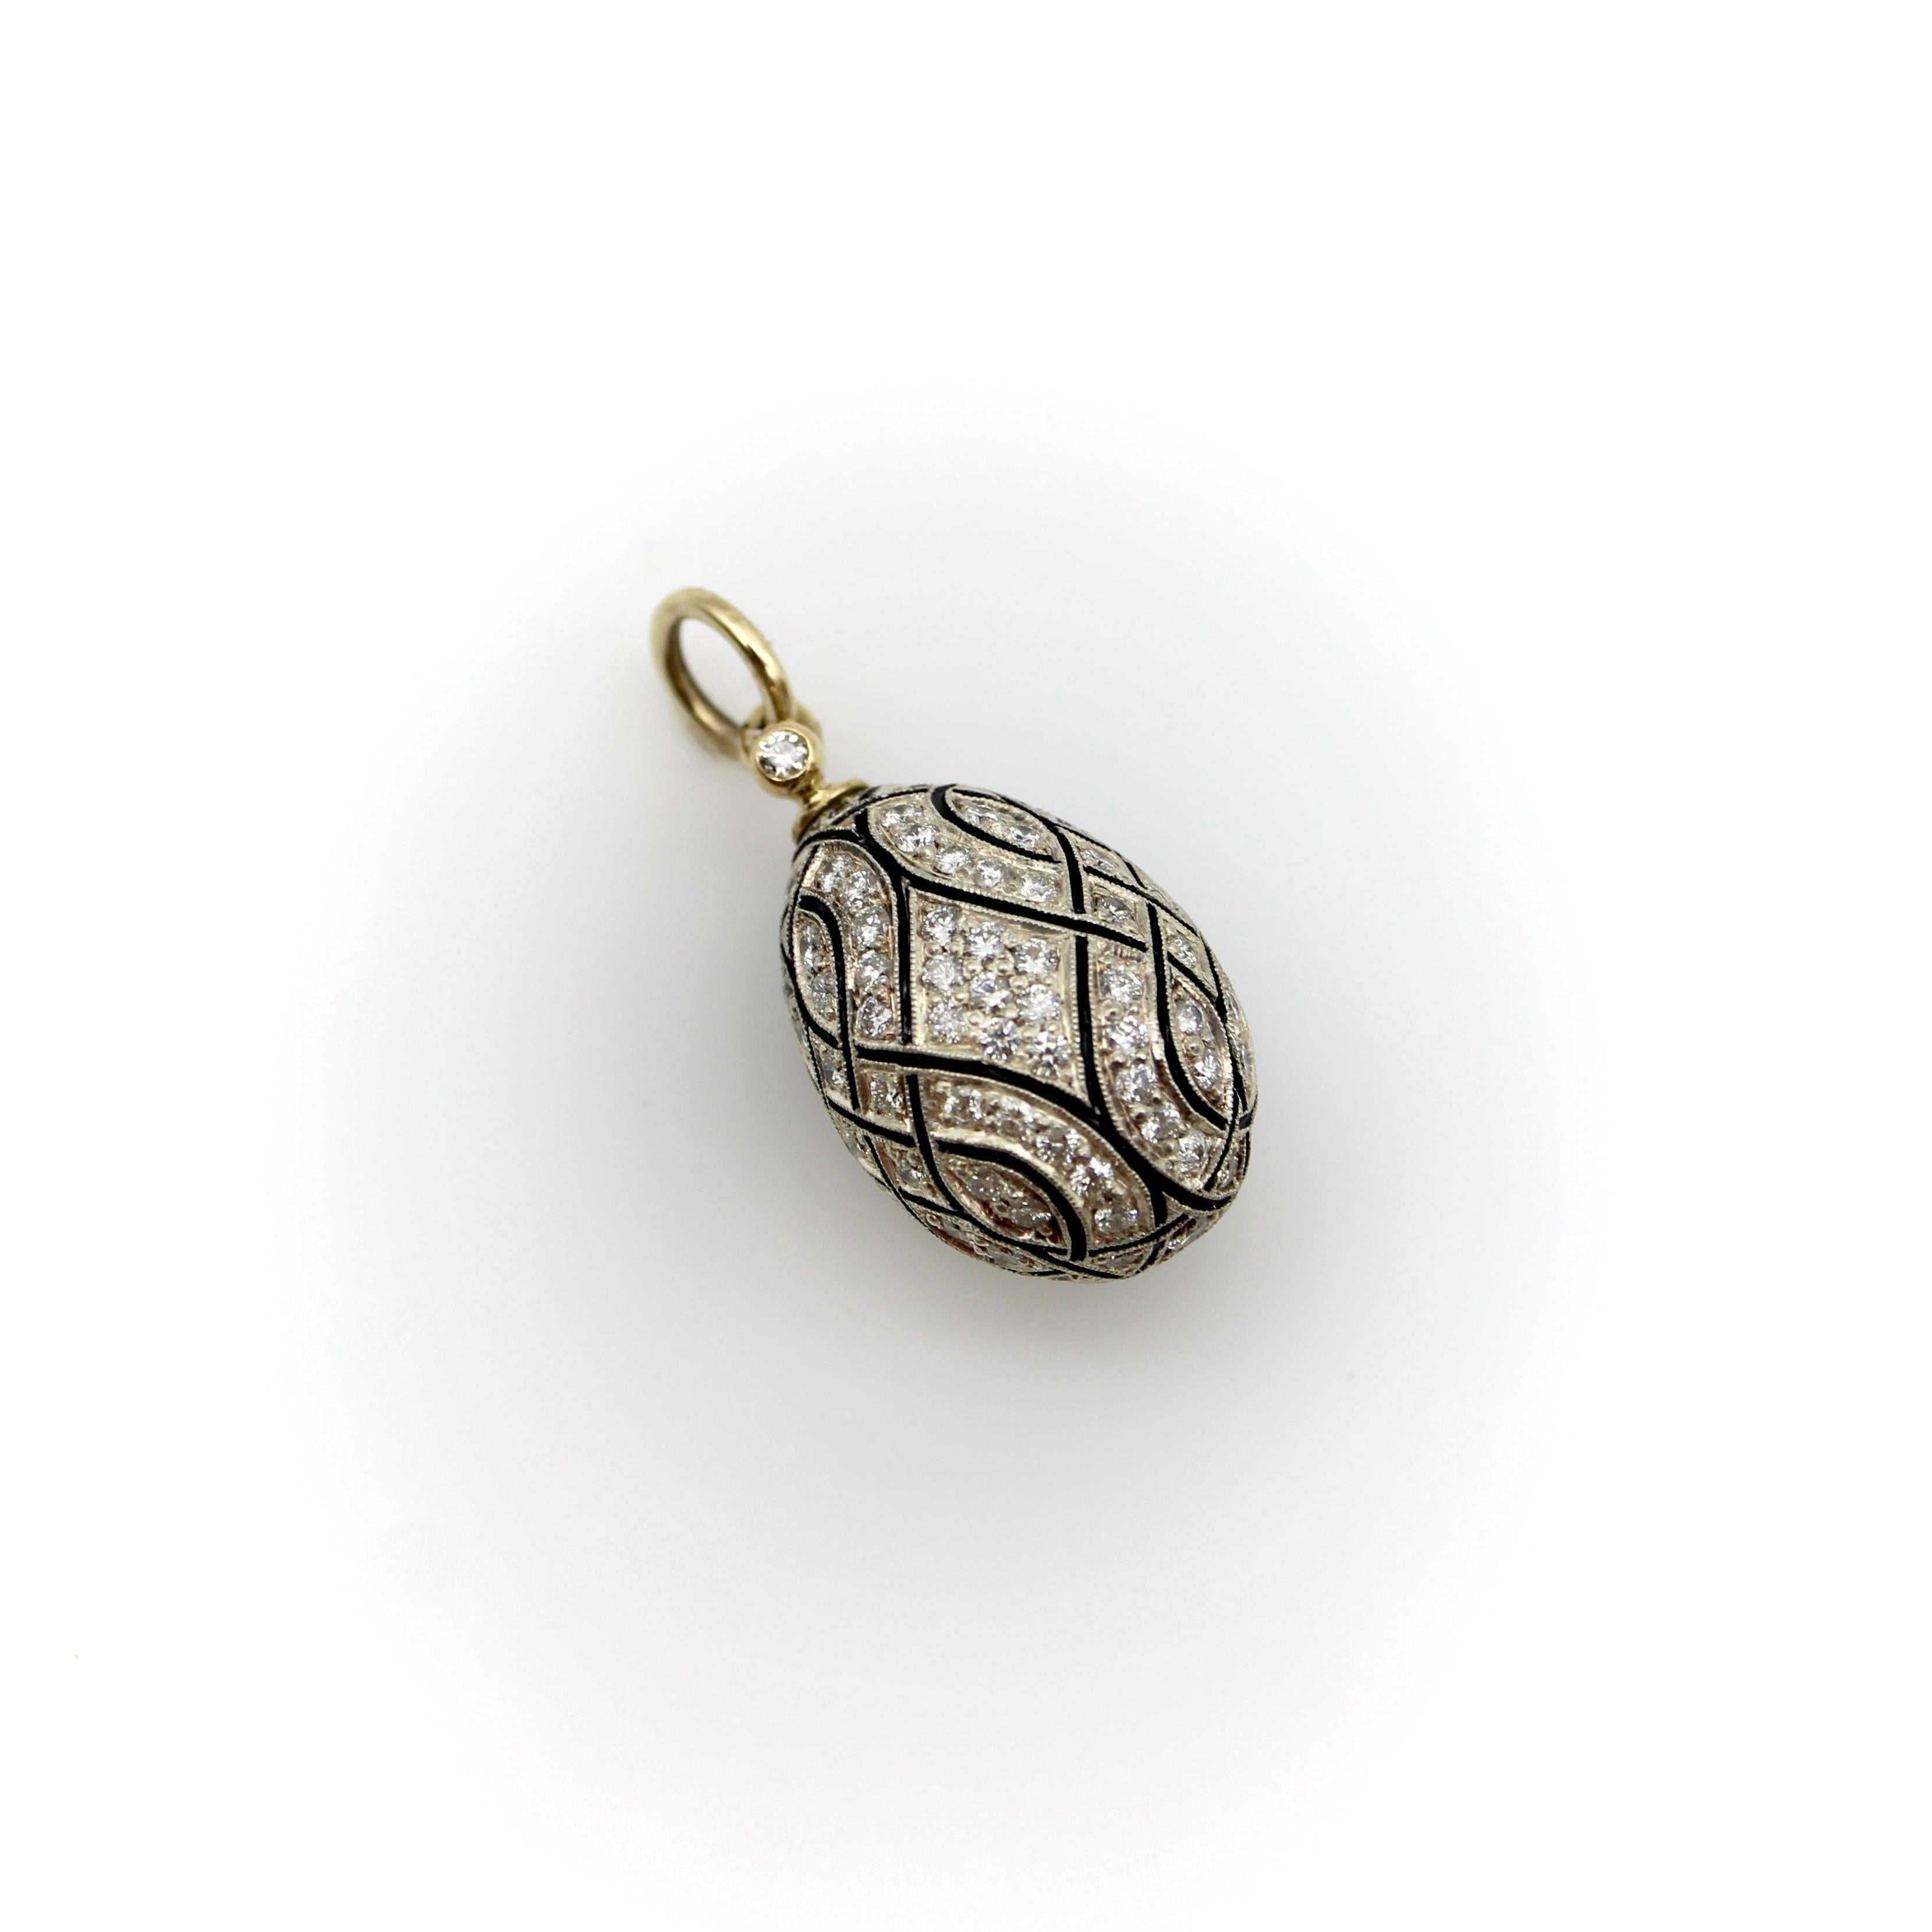 An opulent 18k gold and silver egg pendant, with a look and feel inspired by Karl Fabergé and the jewelers of Pre-Revolutionary Russia. The pendant contains 133 small diamonds covering the surface of the silver, in a pattern delineated by